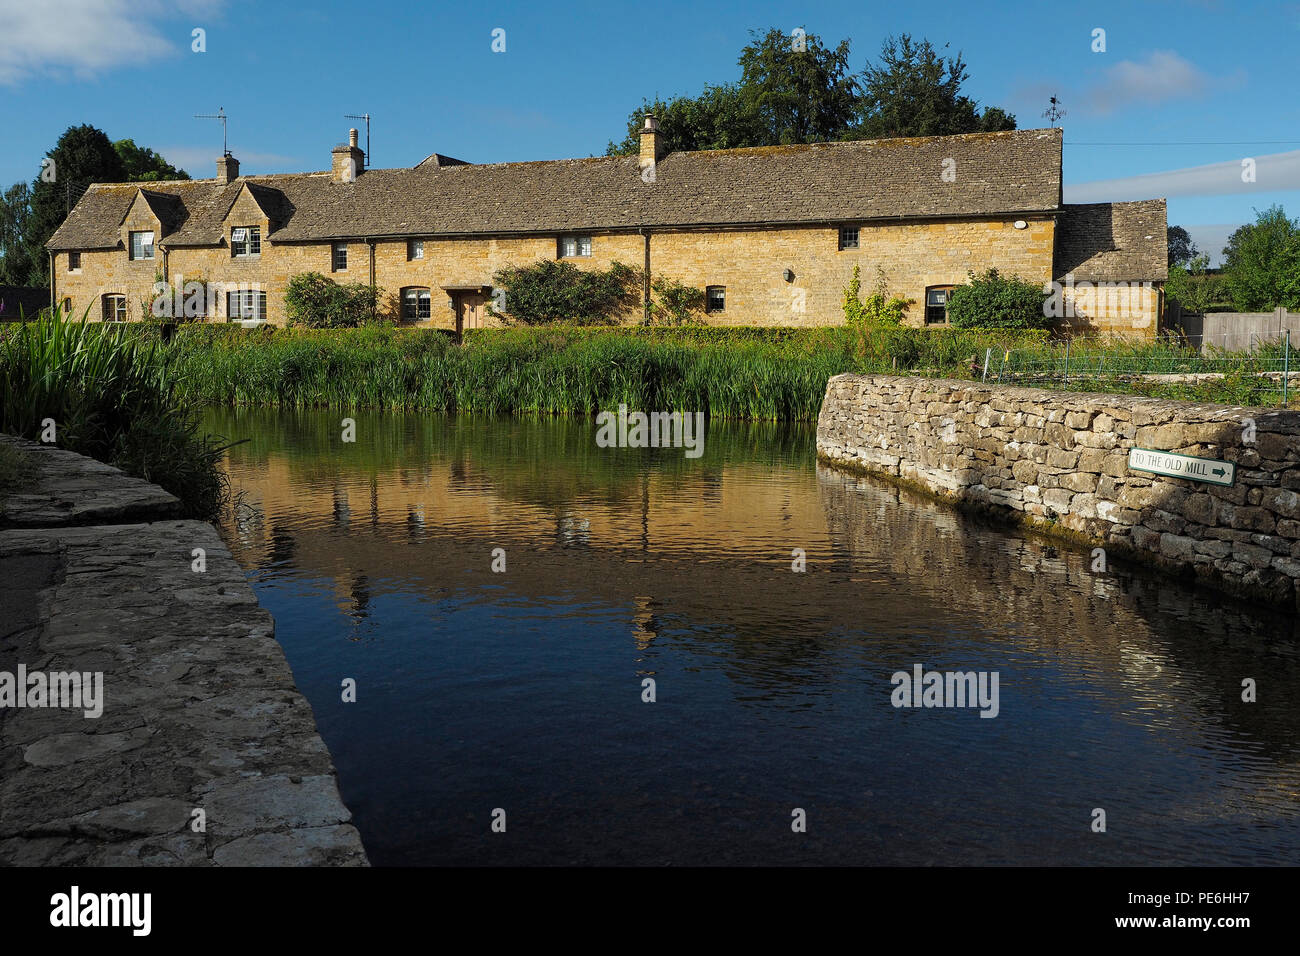 Cotswold Stone Cottages, Lower Slaughter, The Cotswolds Stockfoto